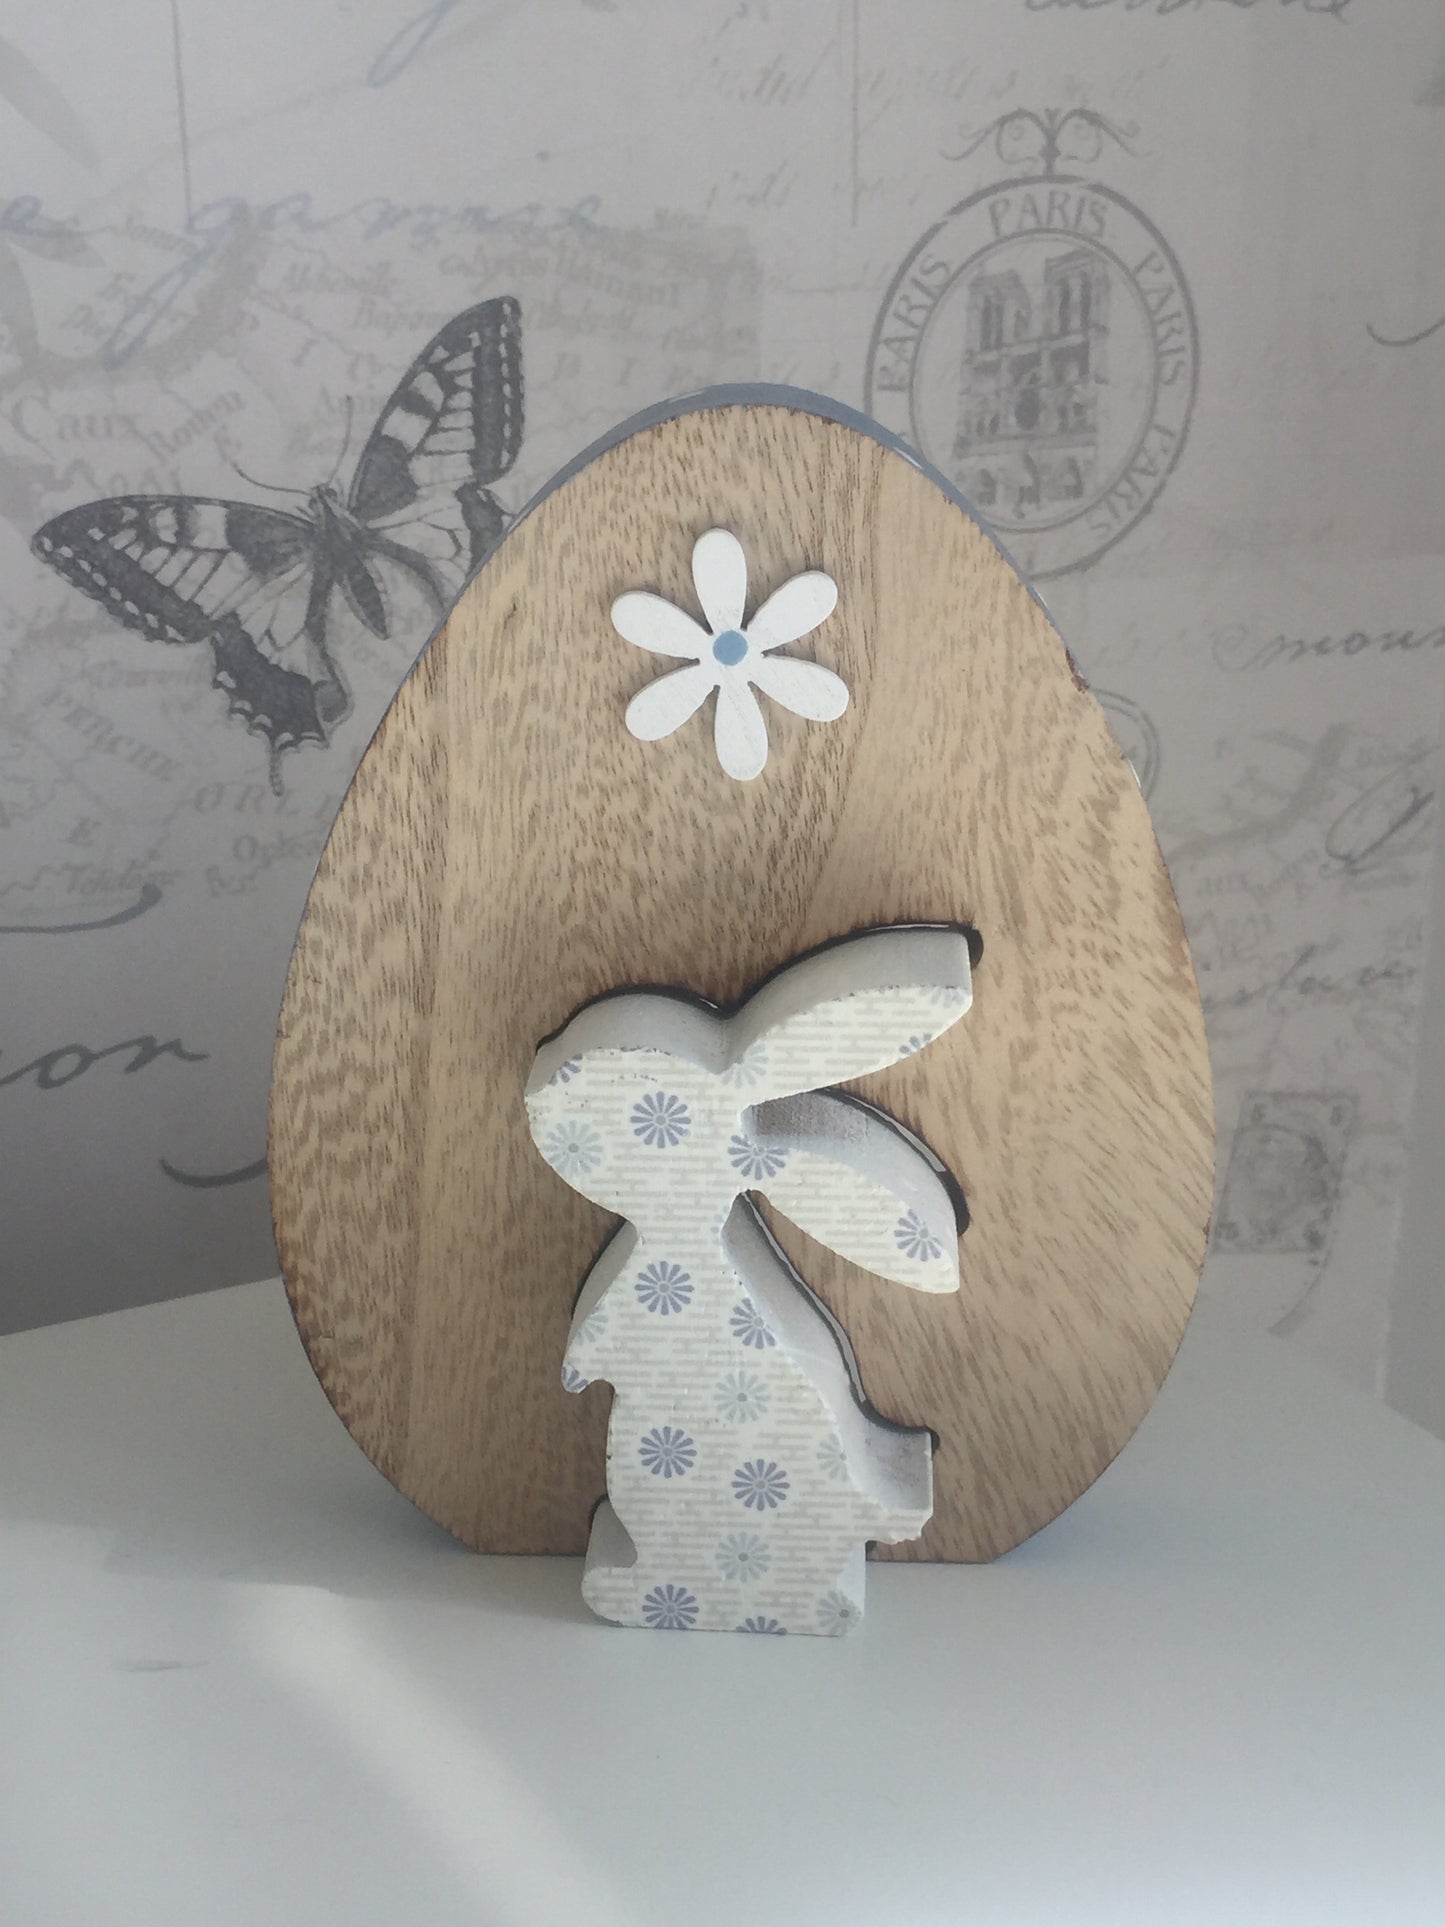 Rustic Wooden Easter Egg Decorations